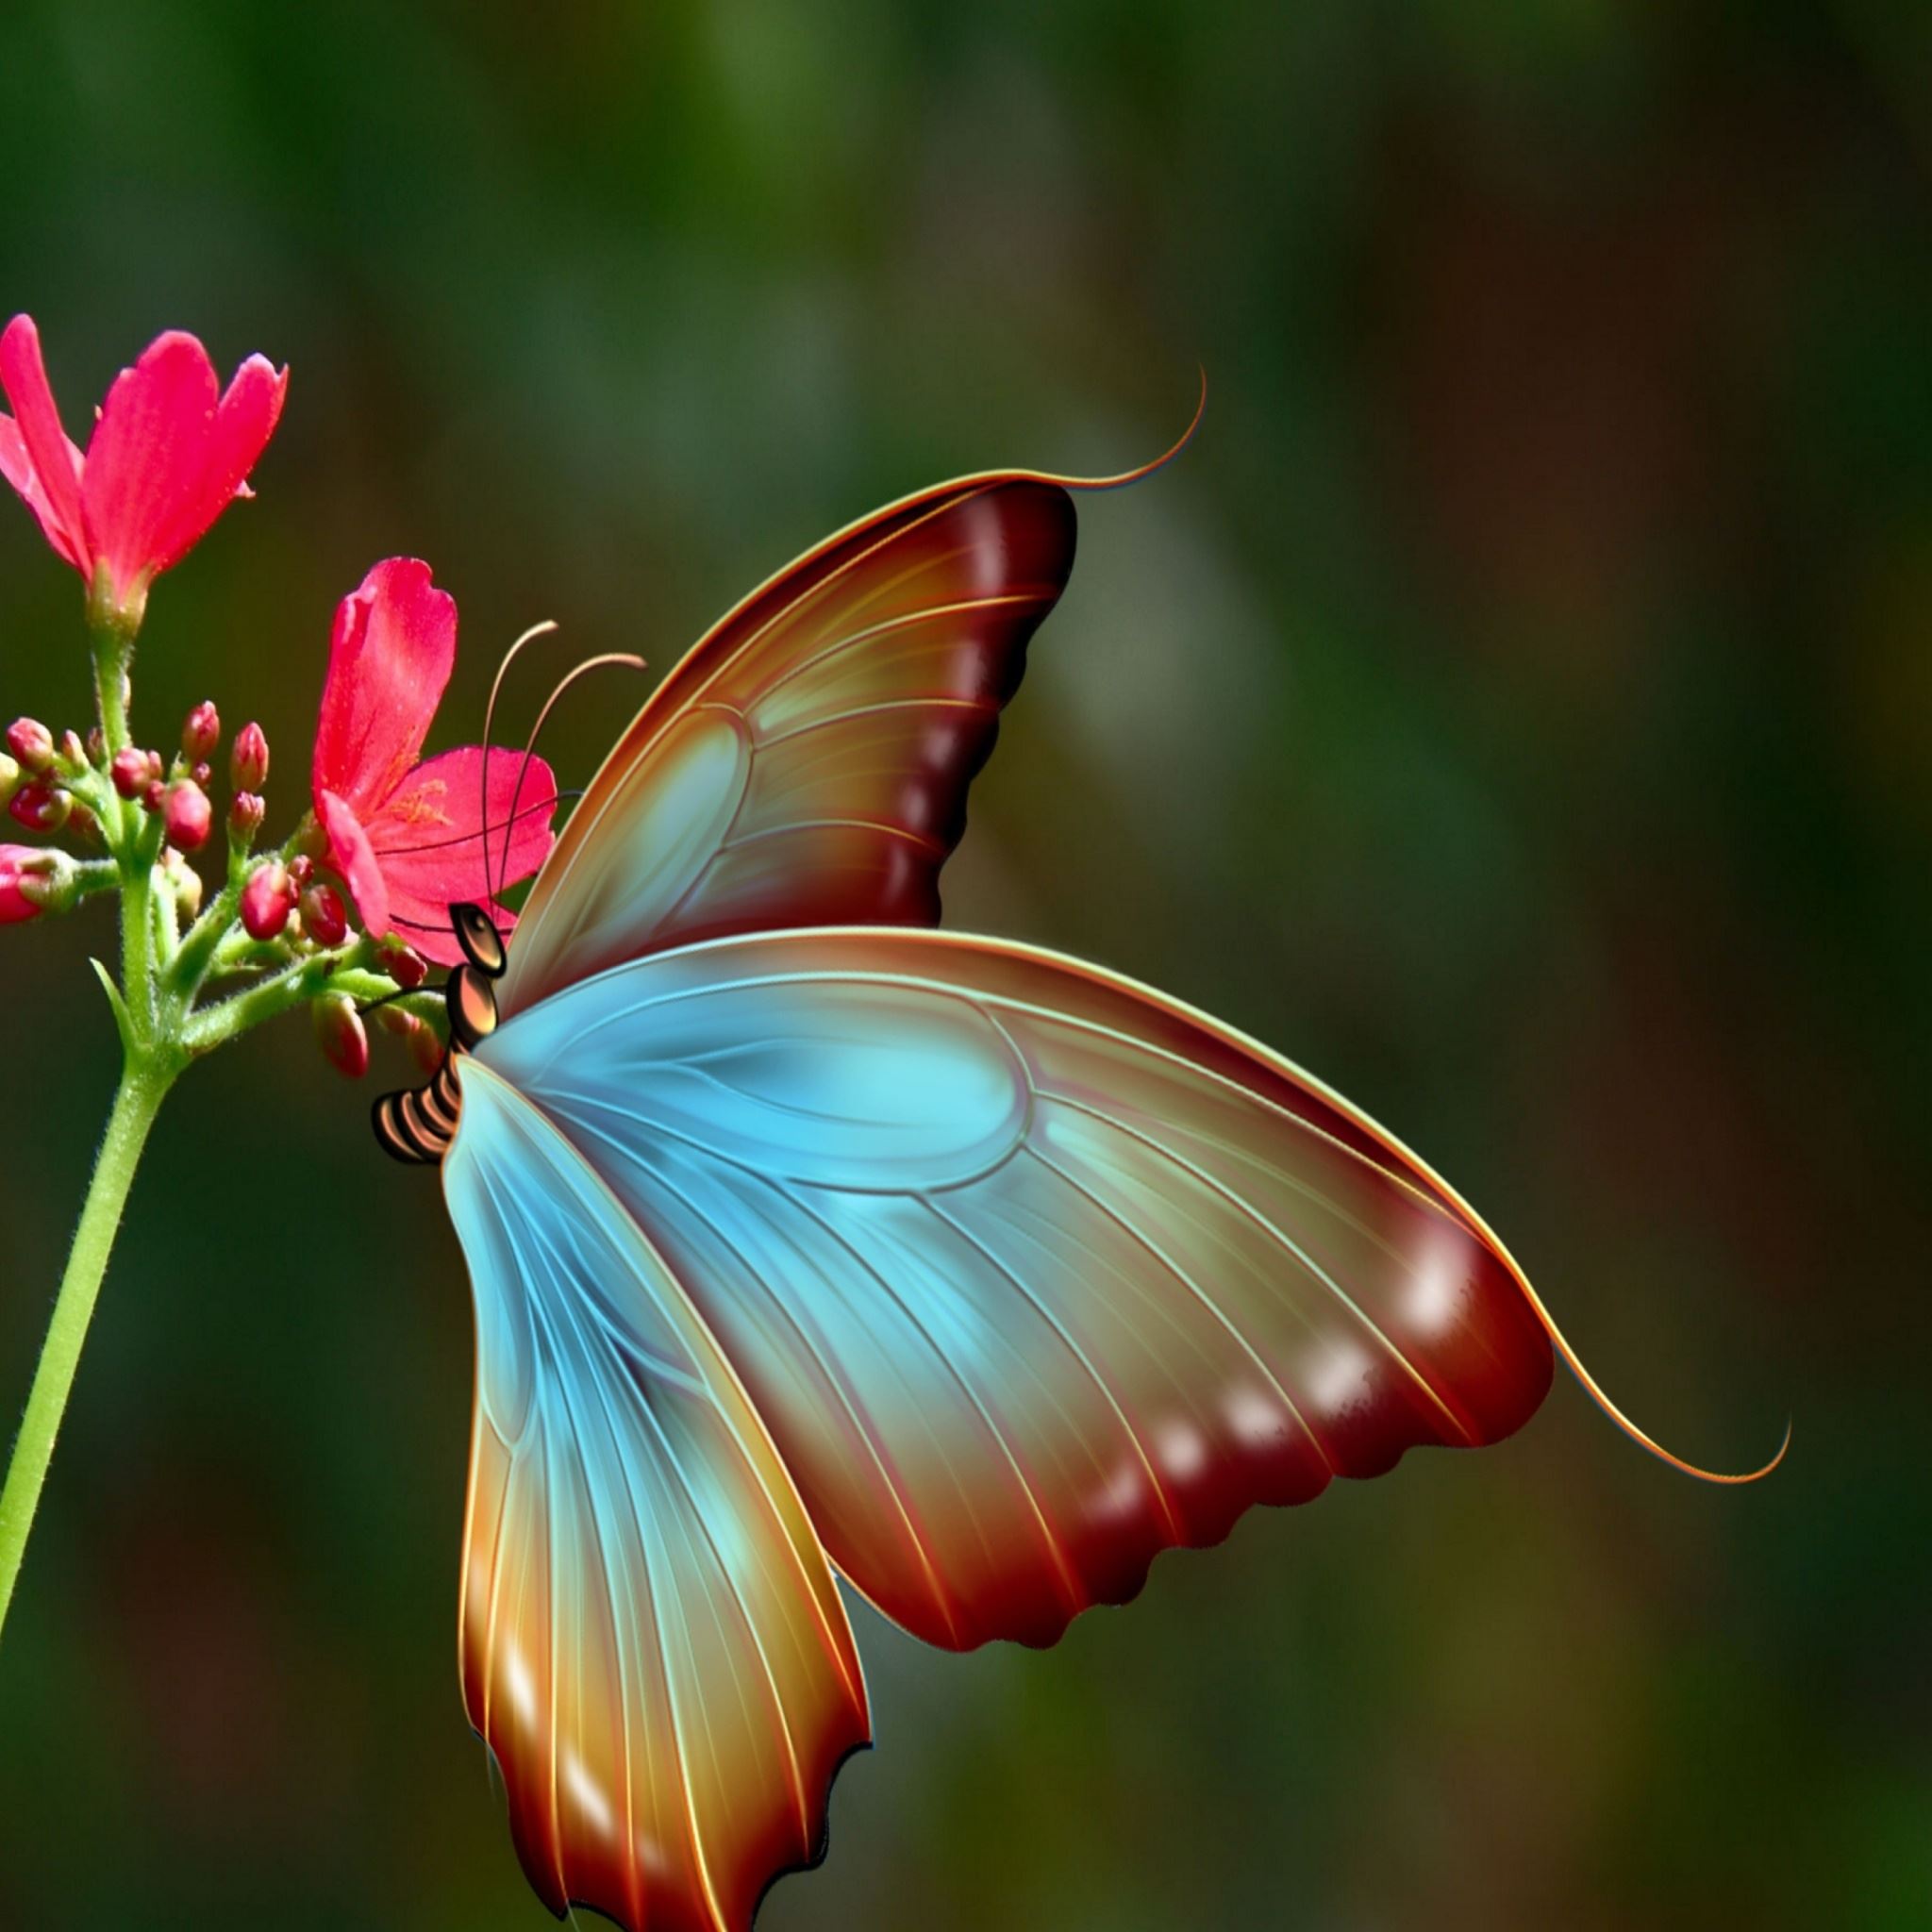 Silky Butterfly Art iPad Air Wallpaper Free Download